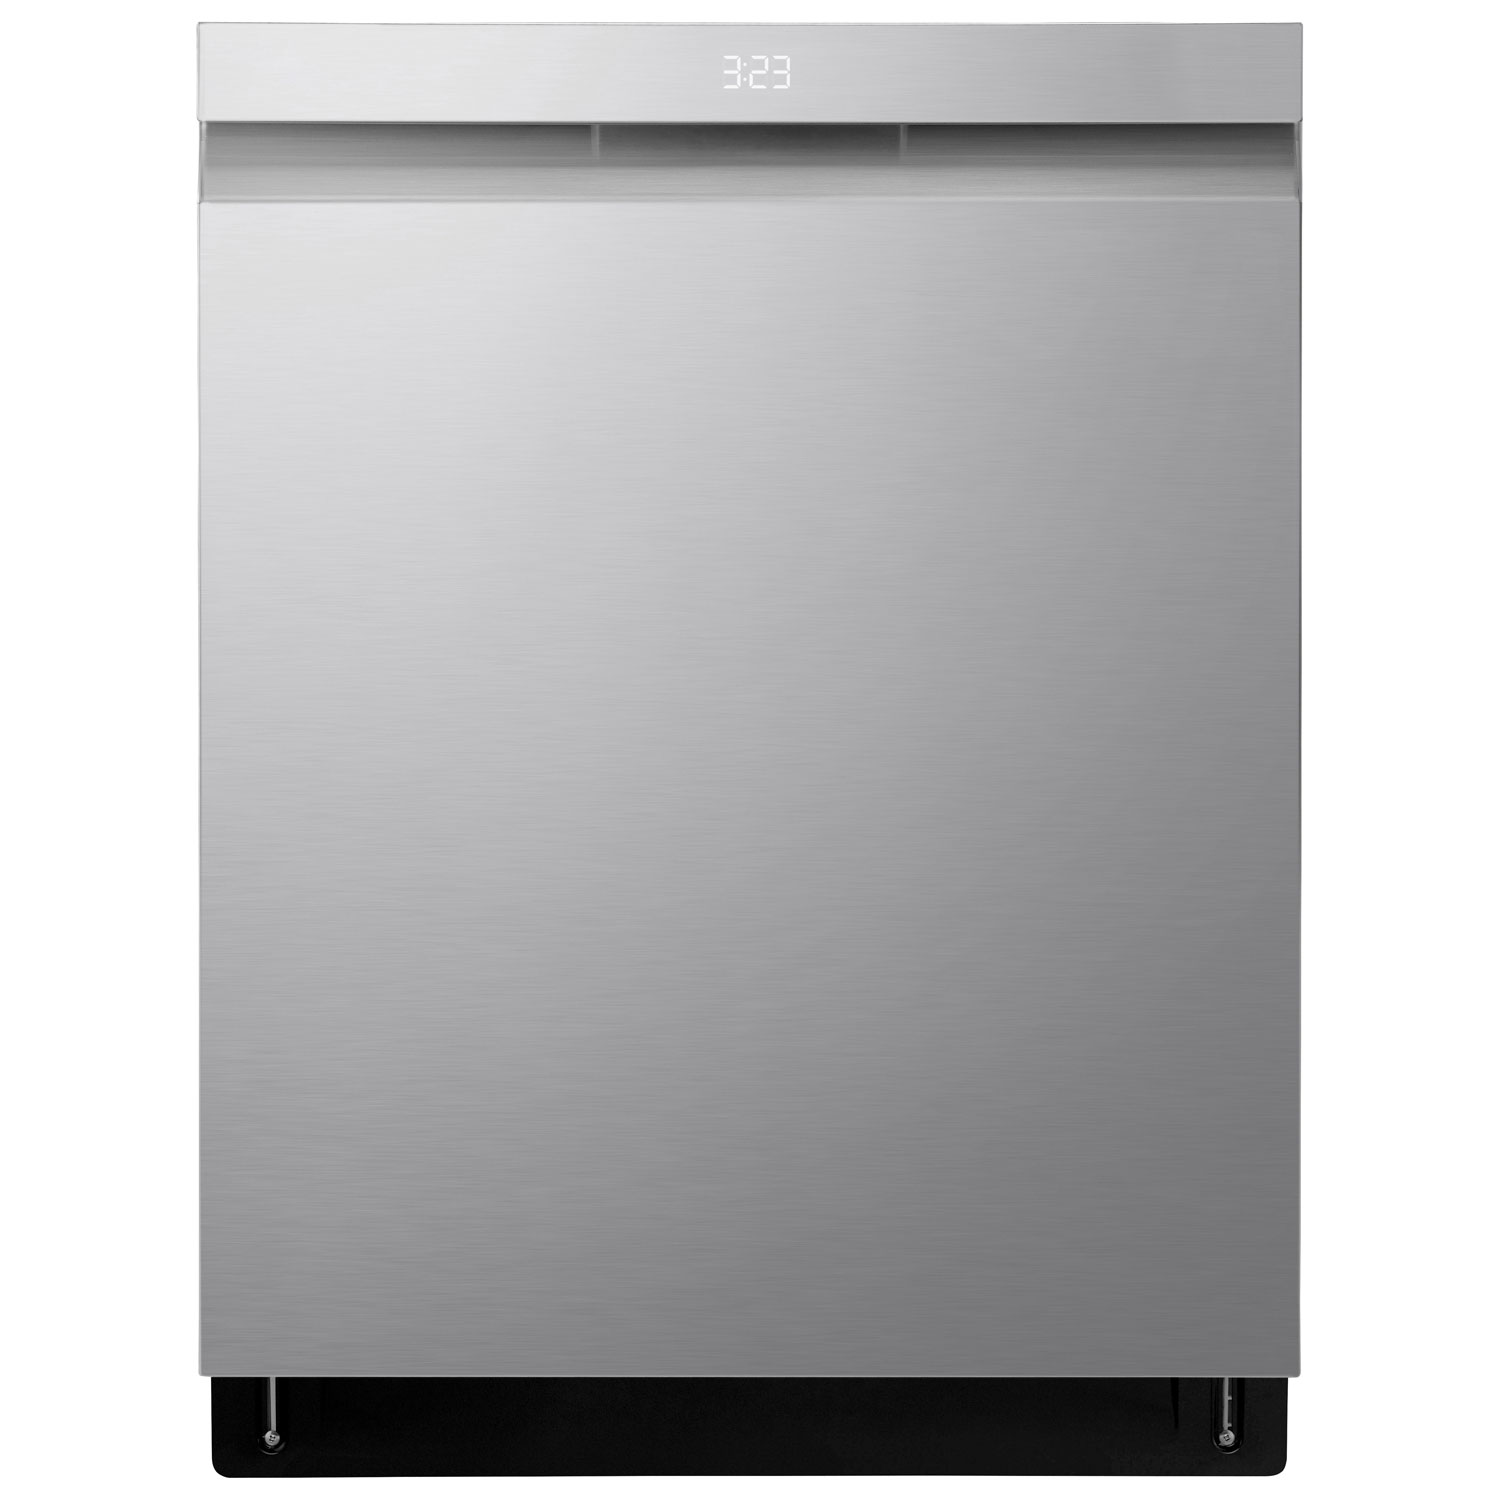 LG 24" 46dB Built-In Dishwasher with Third Rack (LDPH5554S) - Stainless Steel